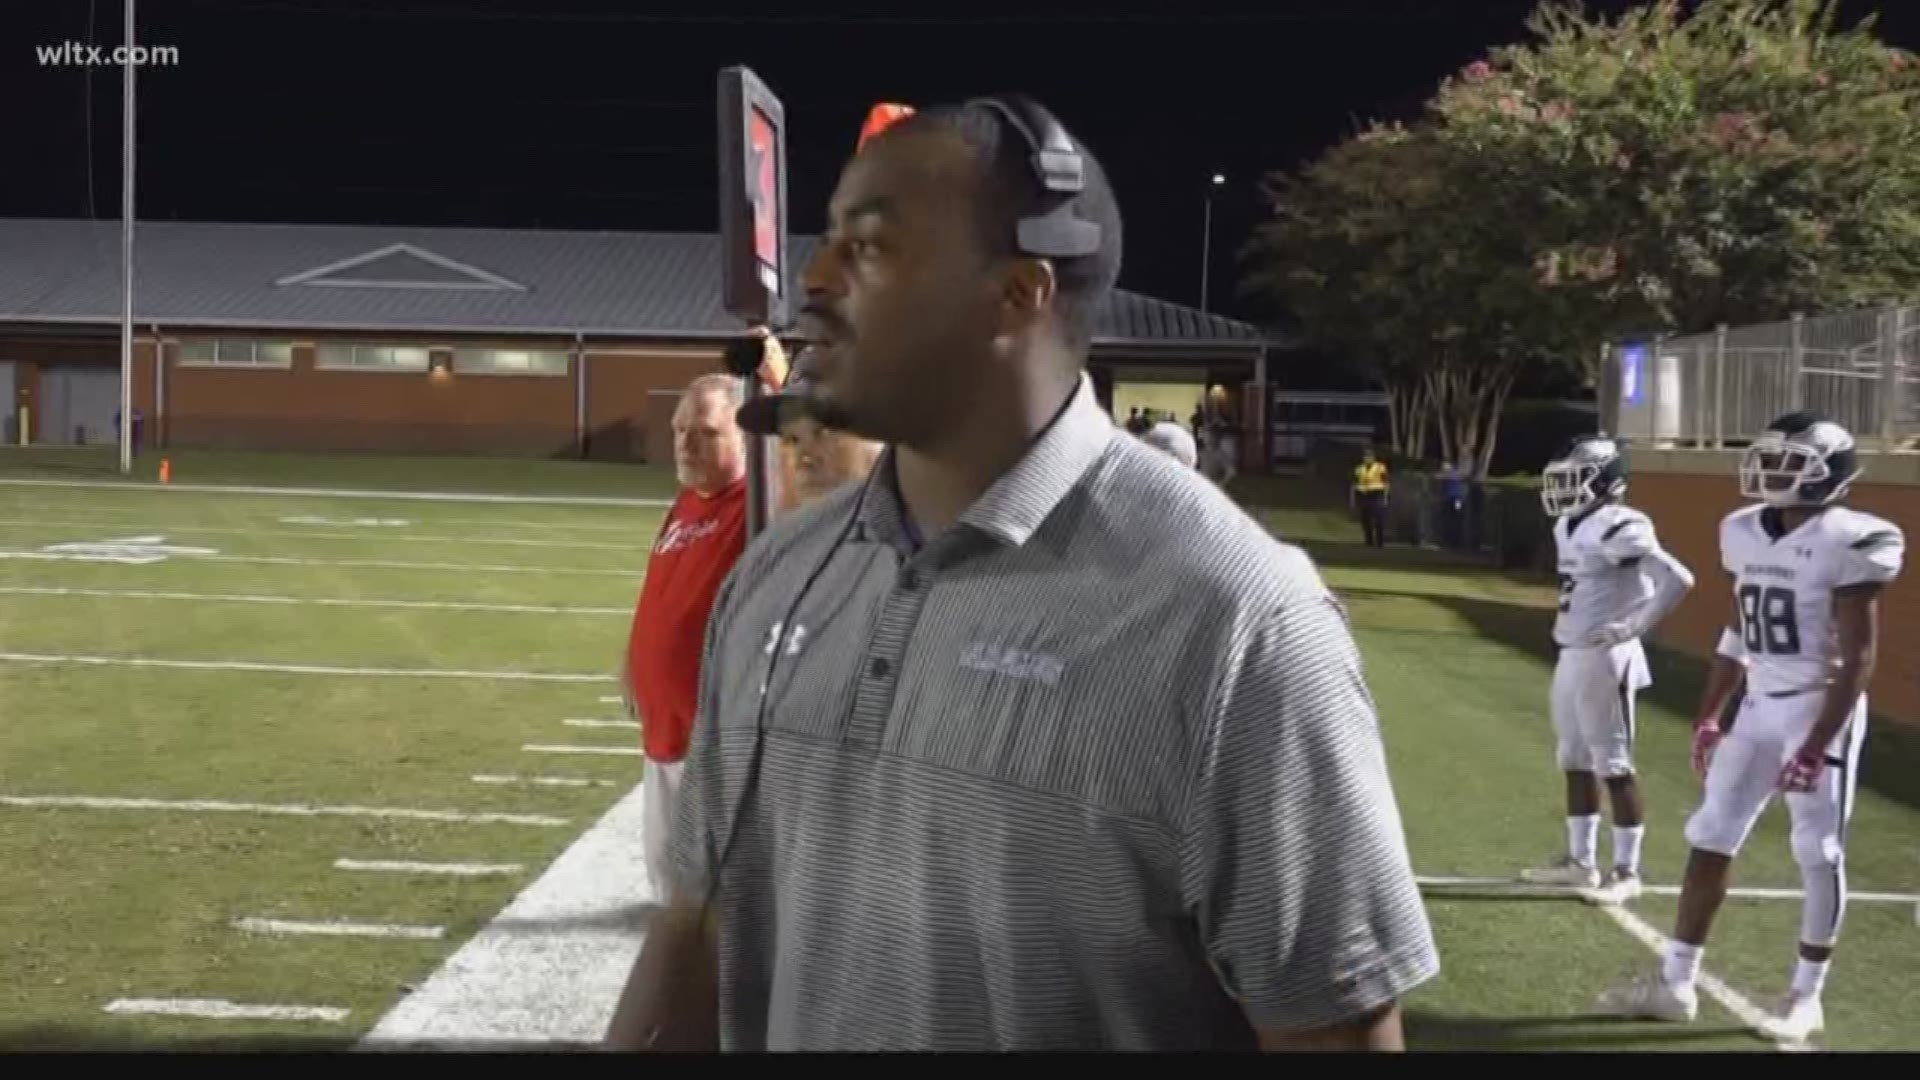 Former Gamecock linebacker Devonte Holloman has returned to Rock Hill to take over the program at South Pointe High School.